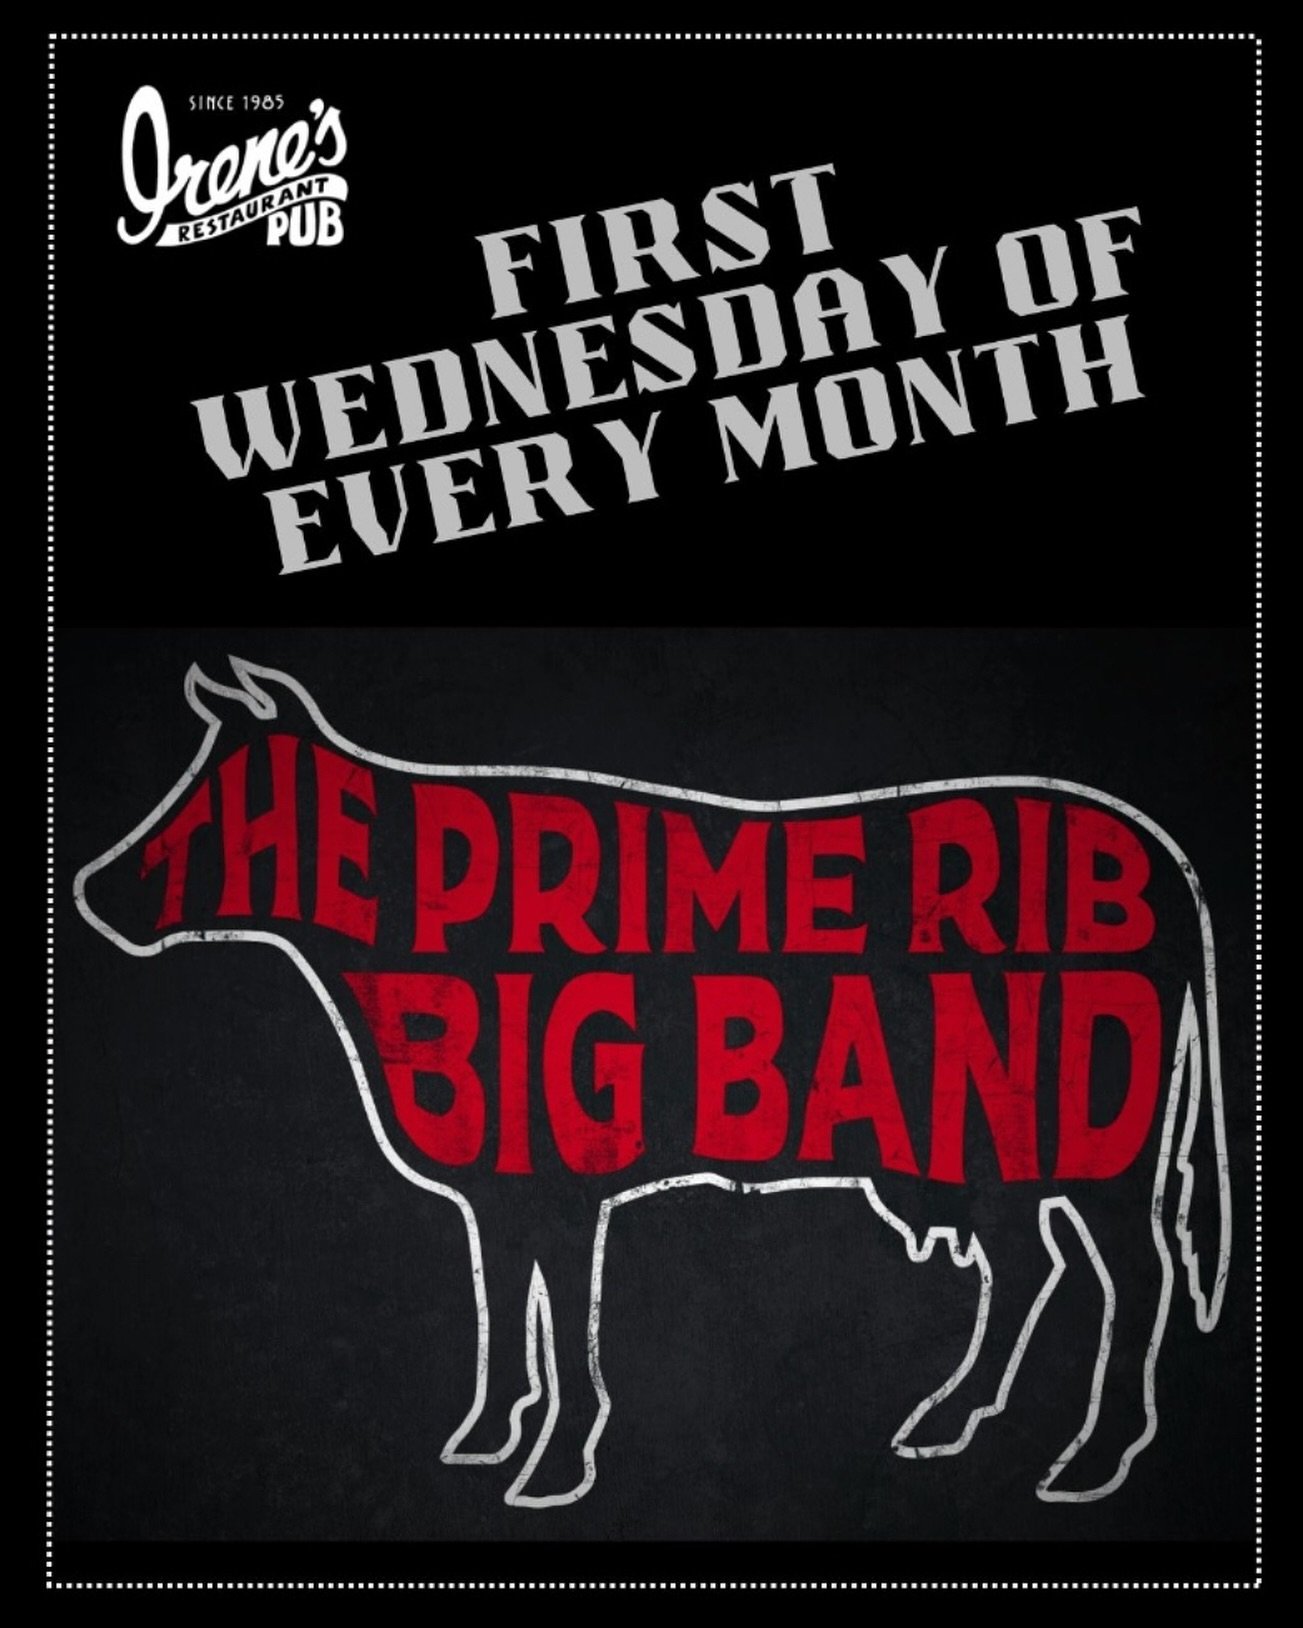 The Prime Rib Big Band is back at Irene&rsquo;s Wednesday night ! Tickets available in the link in bio. #primerib #bigband #ottawamusic #ottawalivemusic #livemusicottawa #livemusic #irenespub